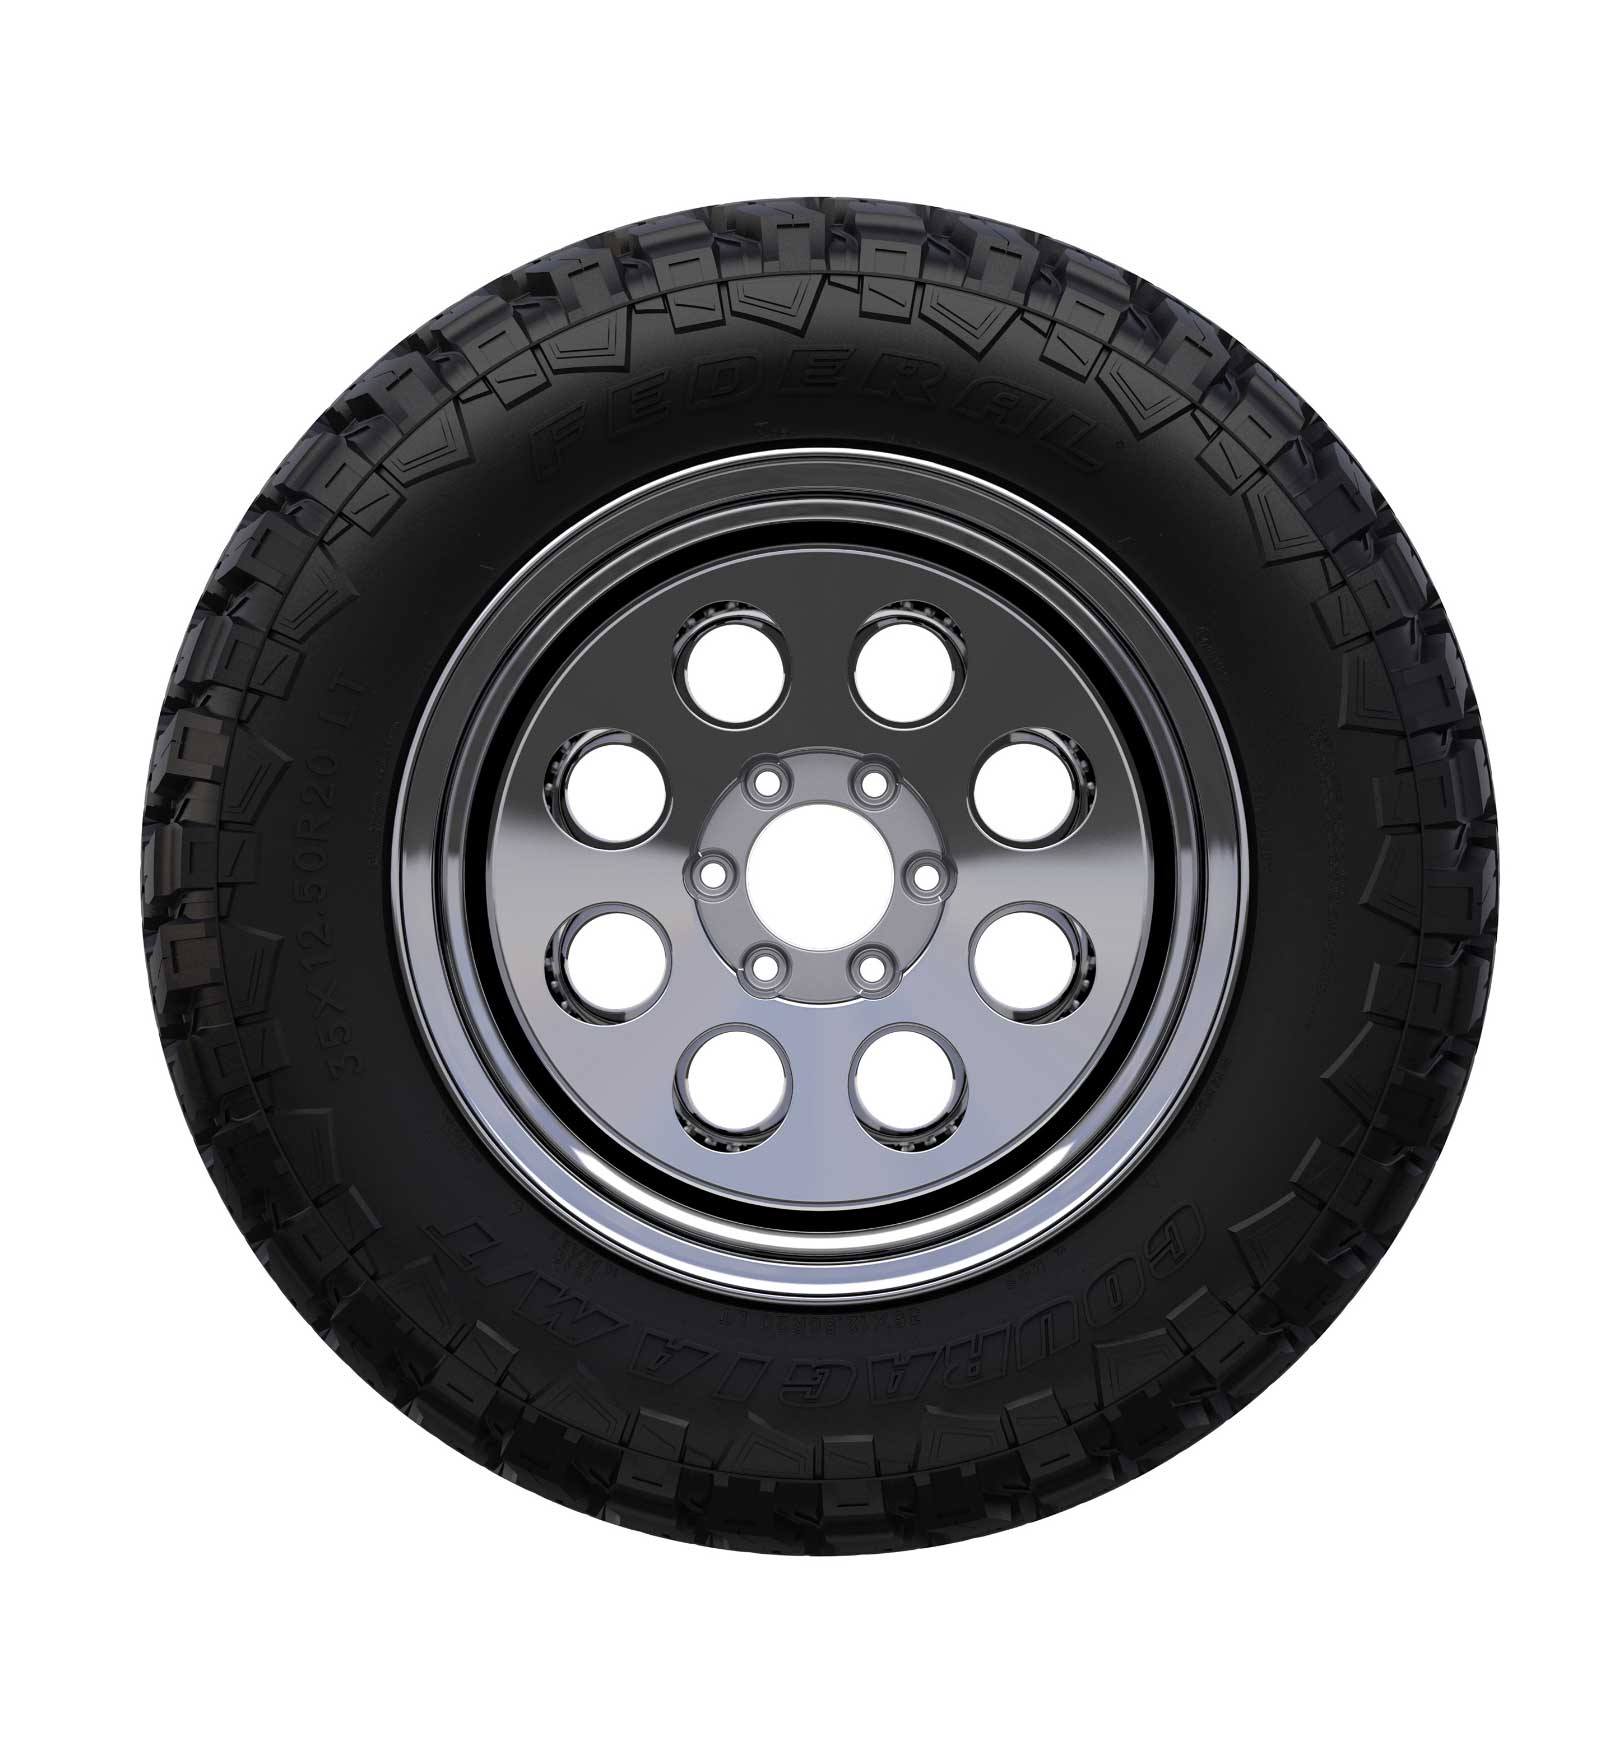 33X12.50R20LT-10PR FEDERAL COURAGIA M/T – To-Go-Tires